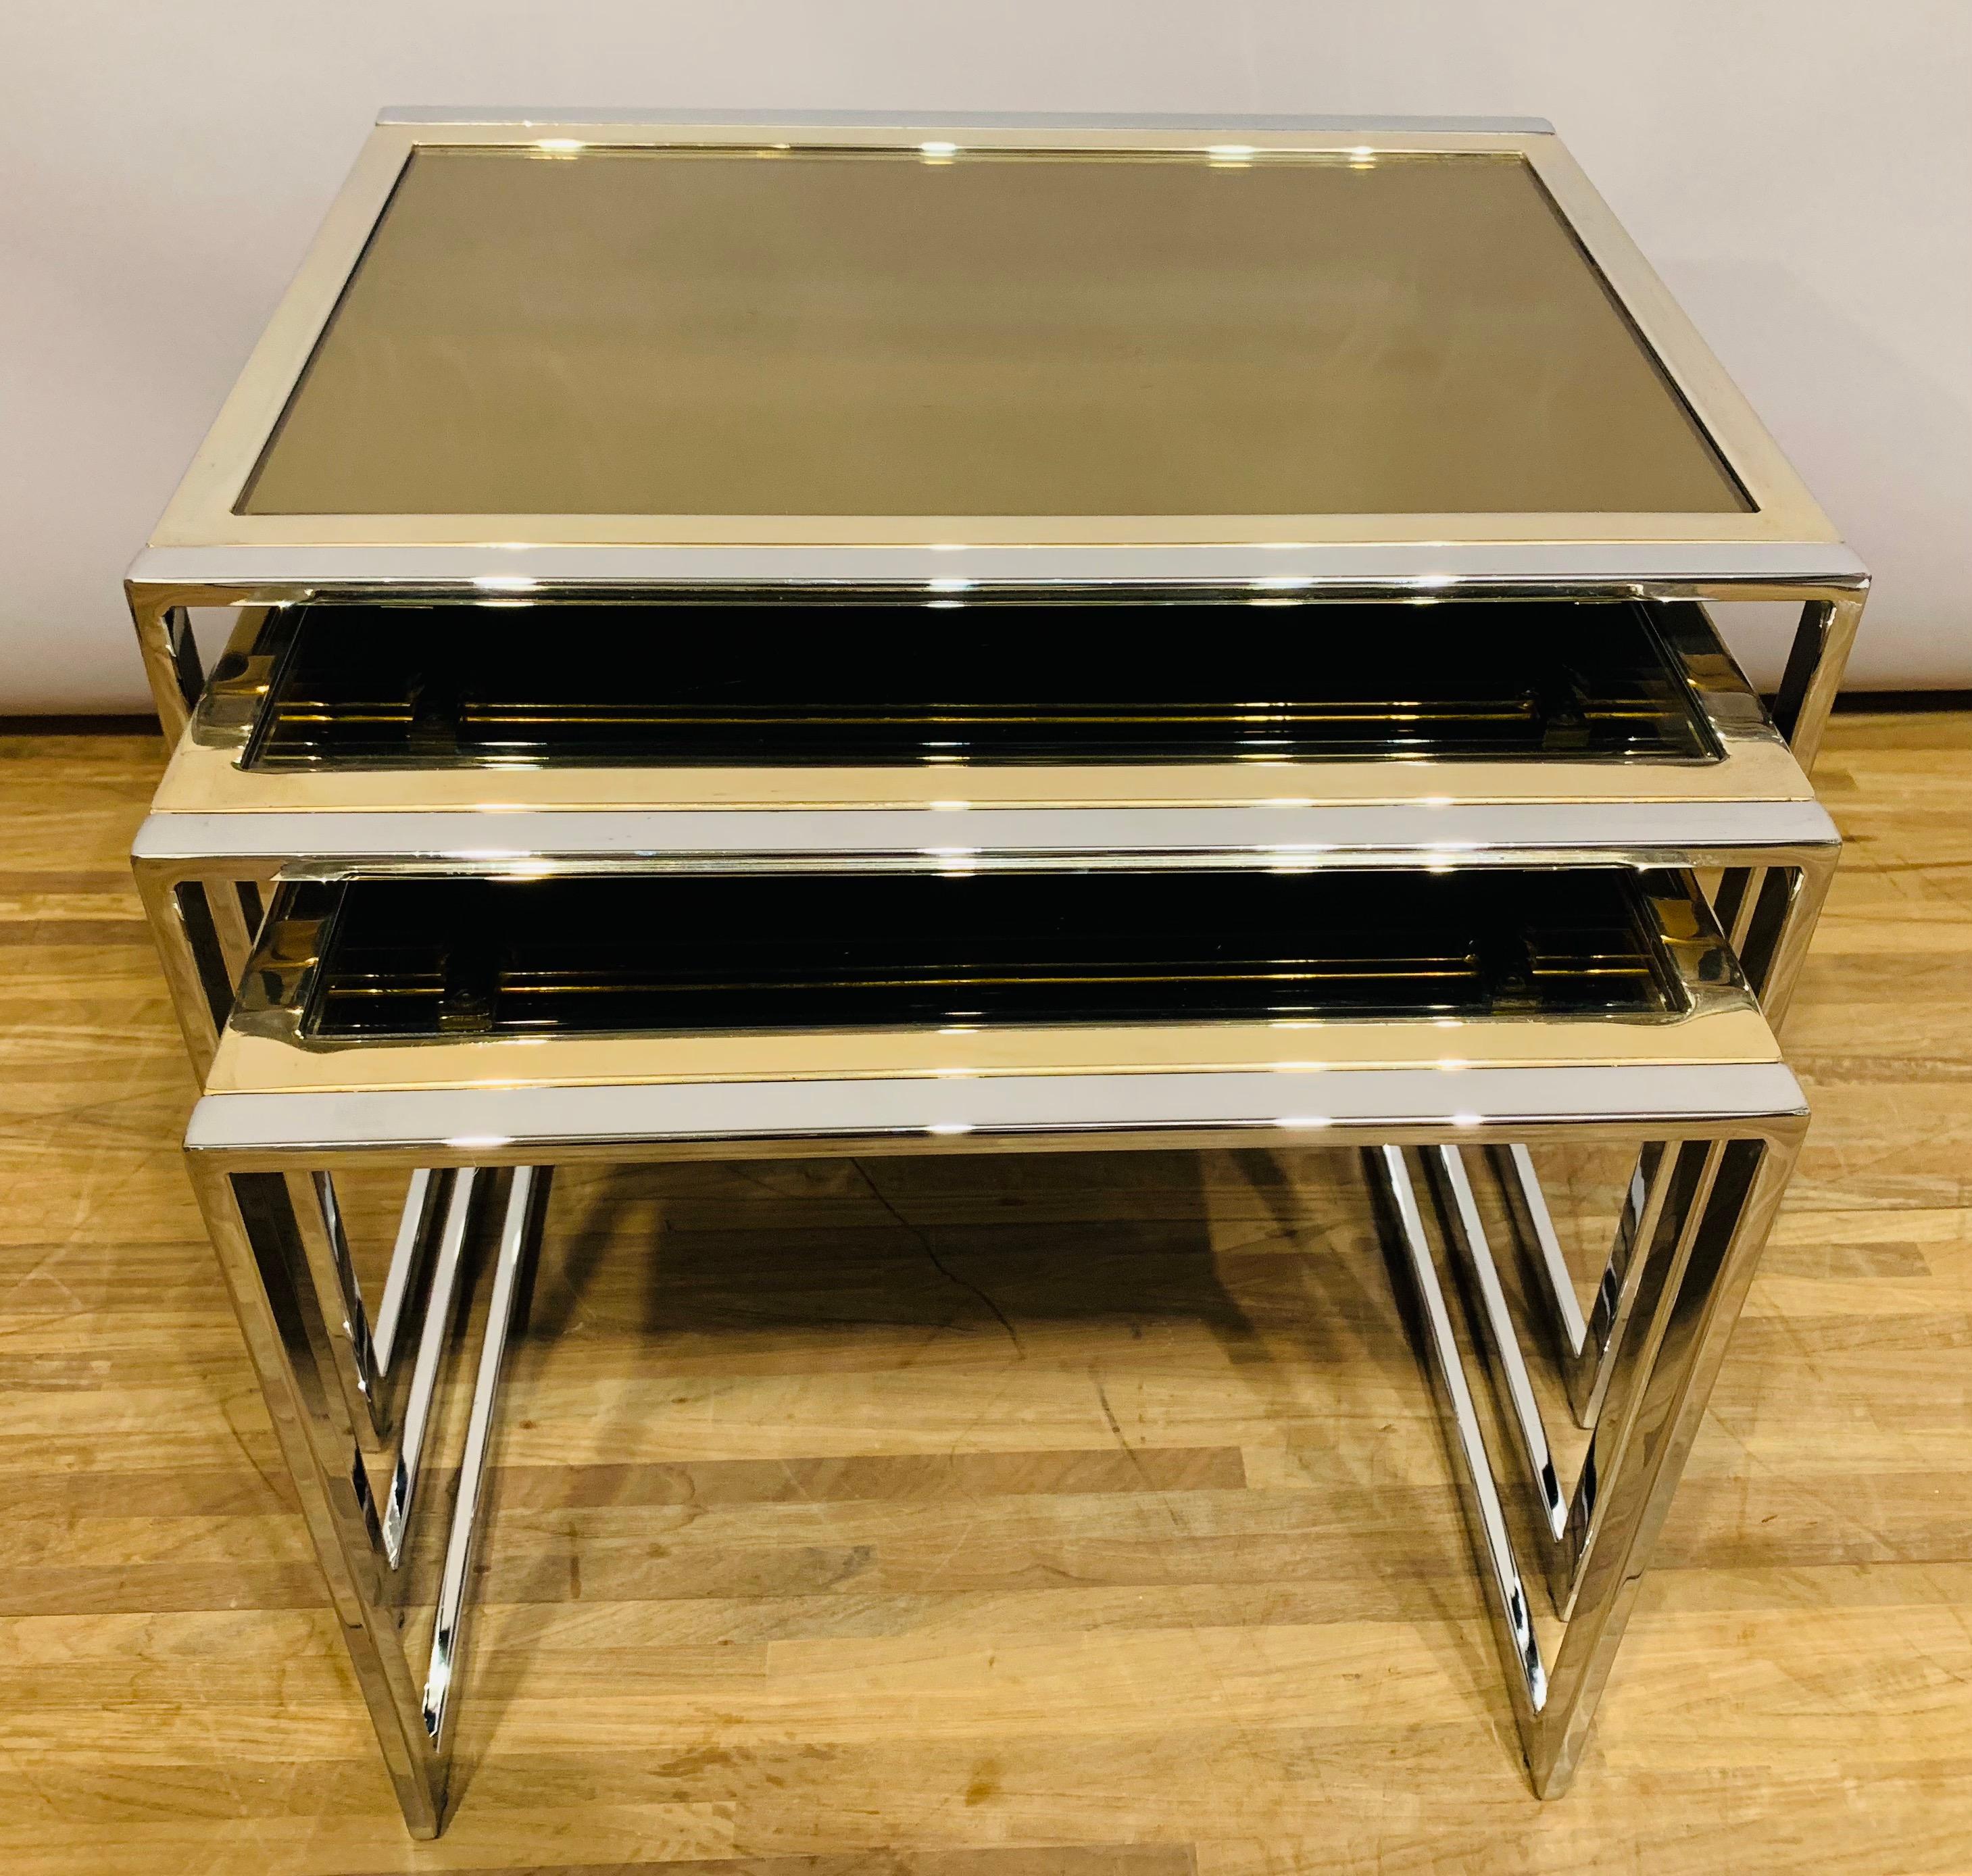 A set of 3 Belgo Chrom nesting tables. The frames are constructed from solid chromed metal with gold chromed trim surrounding the smoked glass mirrored table tops. The mirrored table tops sit within the frame. There are some scratches to the glass